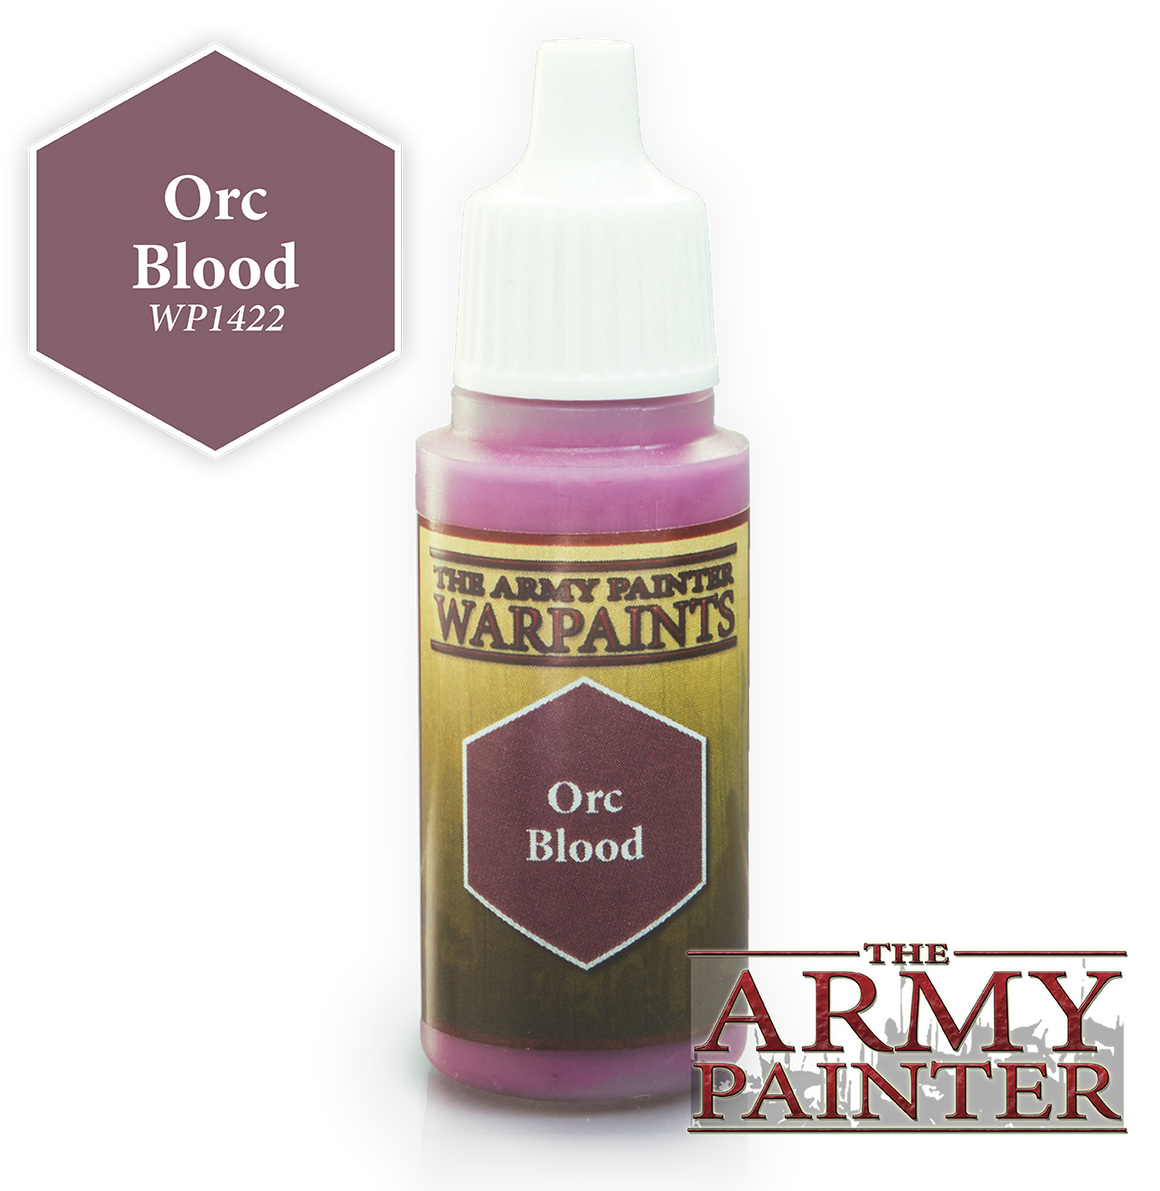 Army Painter Acrylic Warpaint - Orc Blood